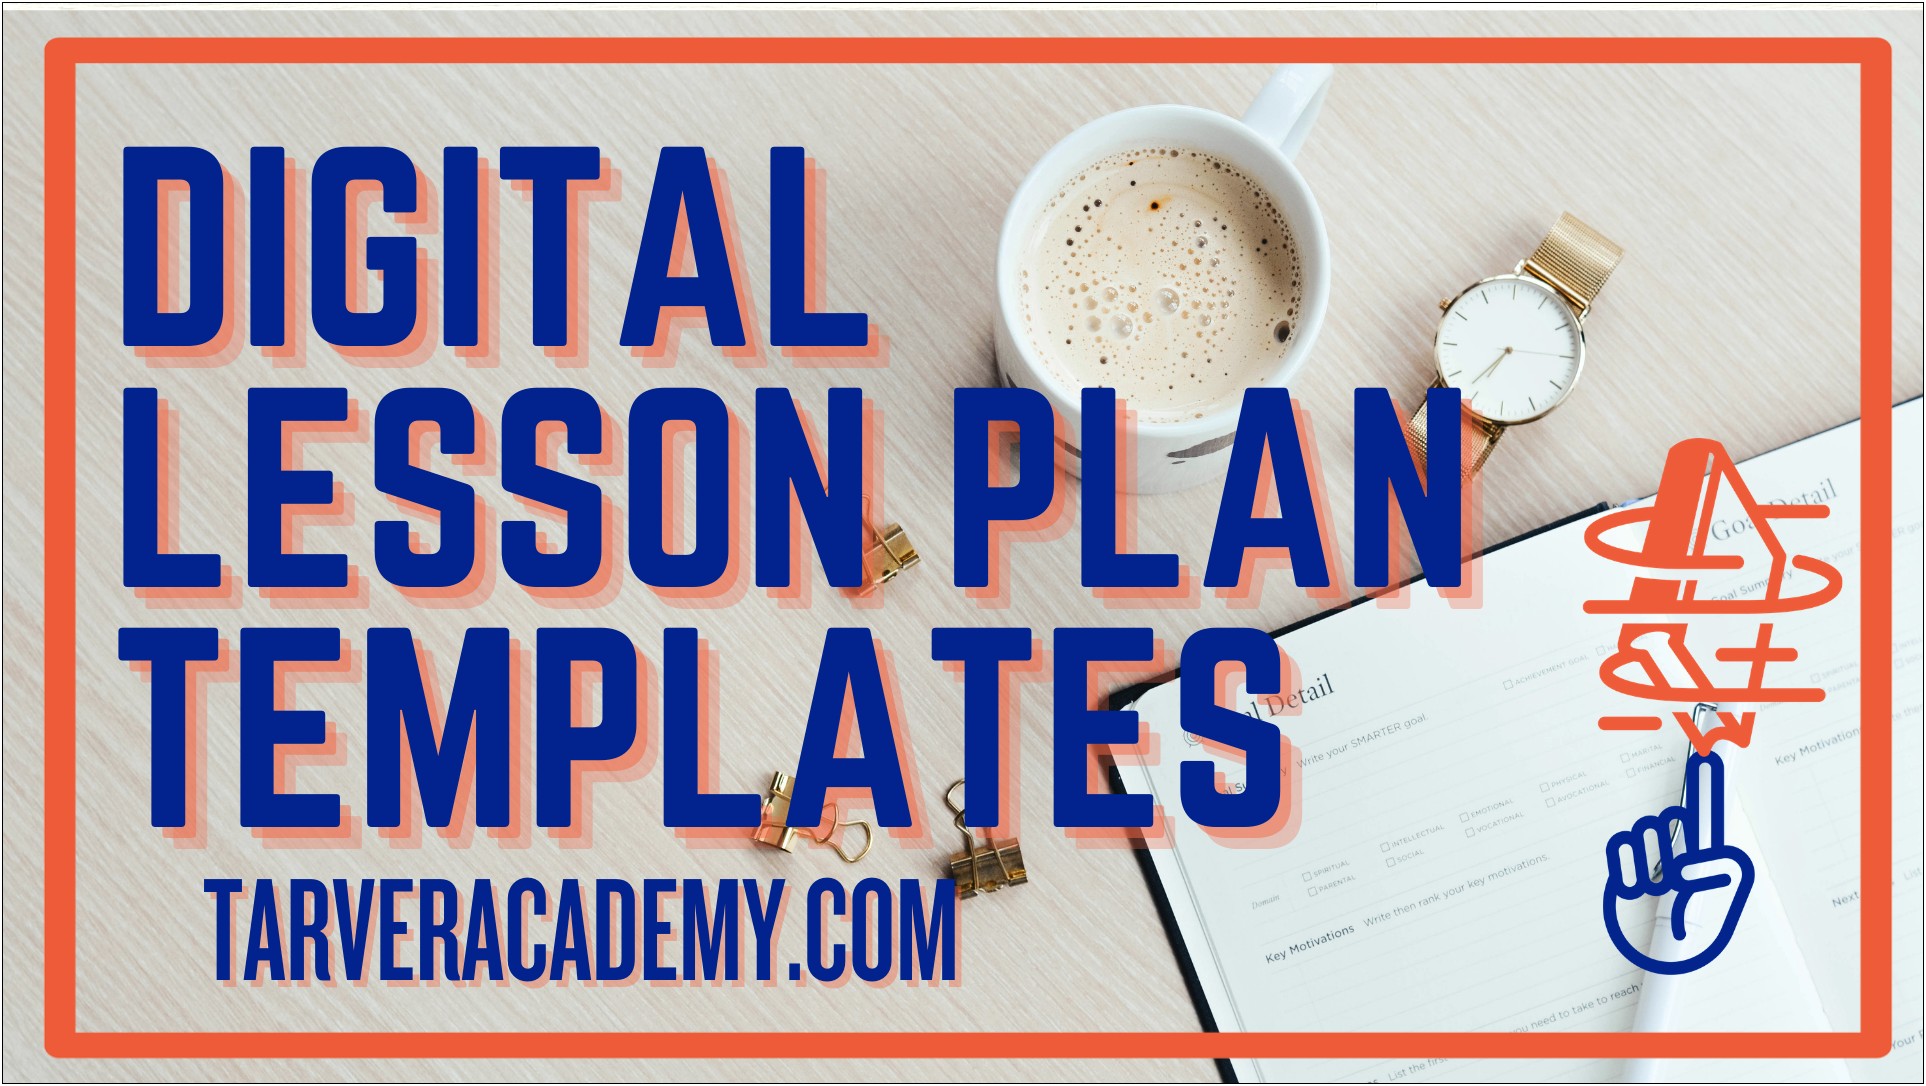 Free Weekly Lesson Plan Template High School